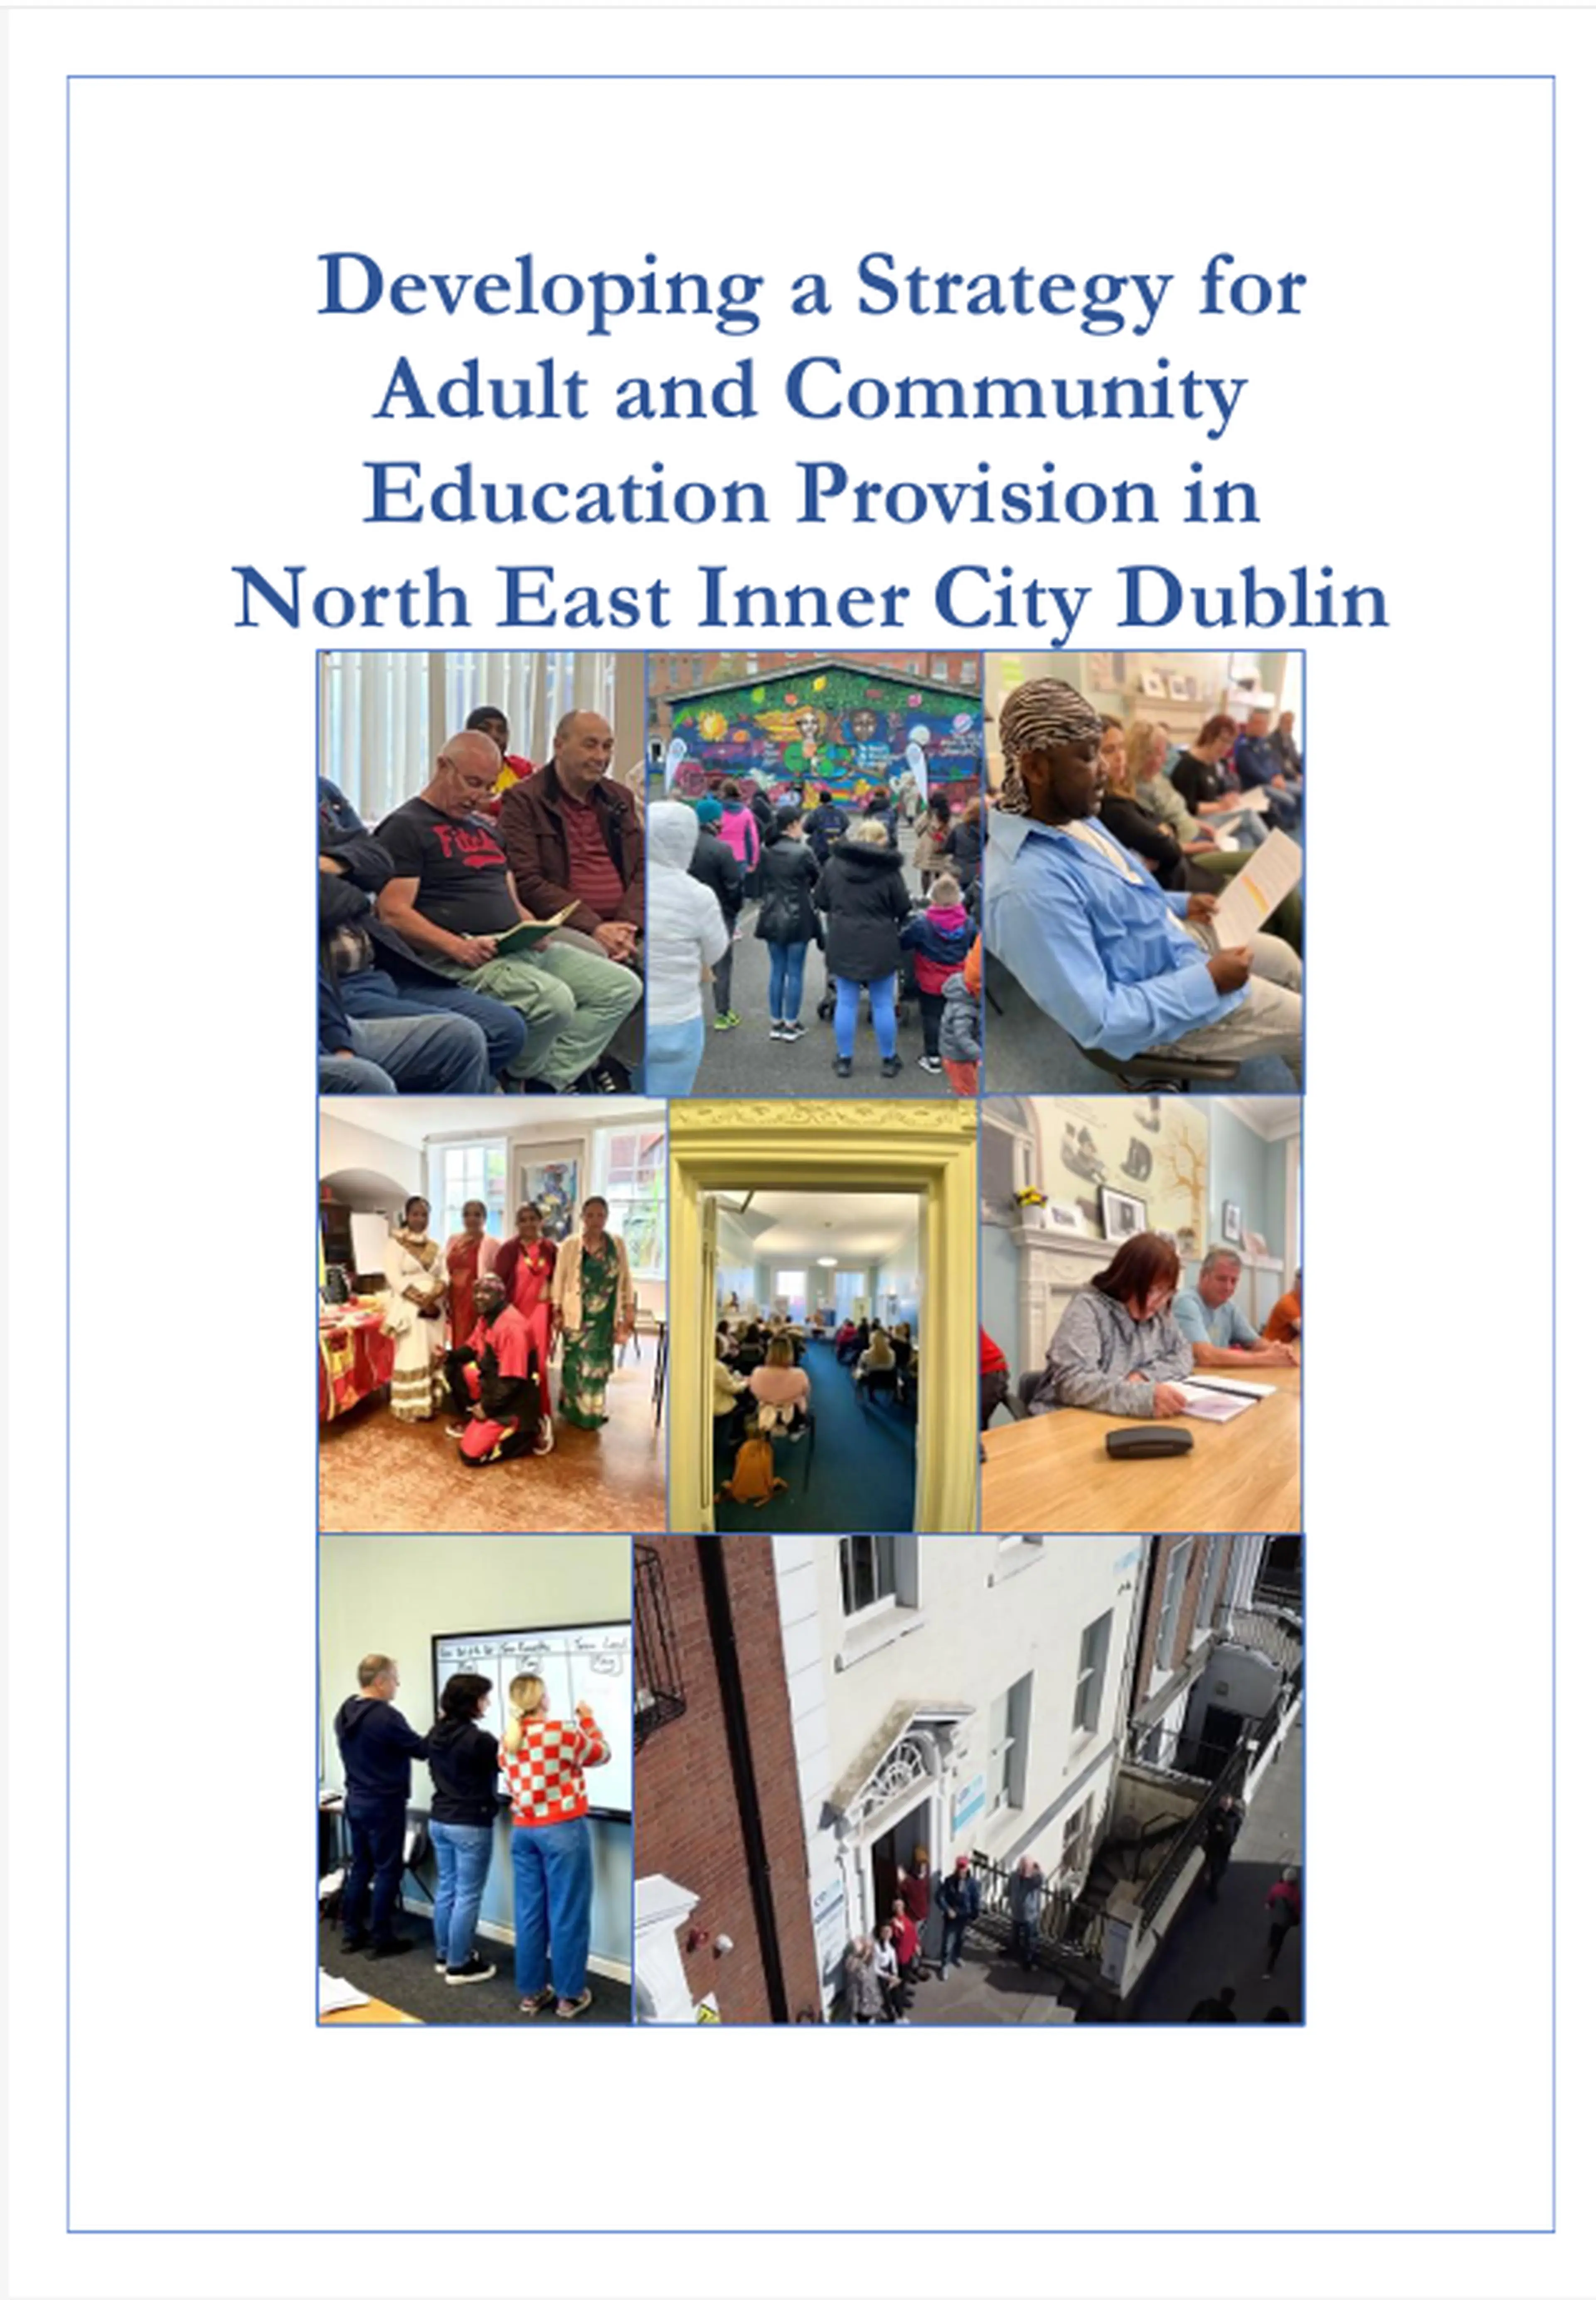 Strategy for Adult and Community Education Provision in North East Inner City Dublin Image